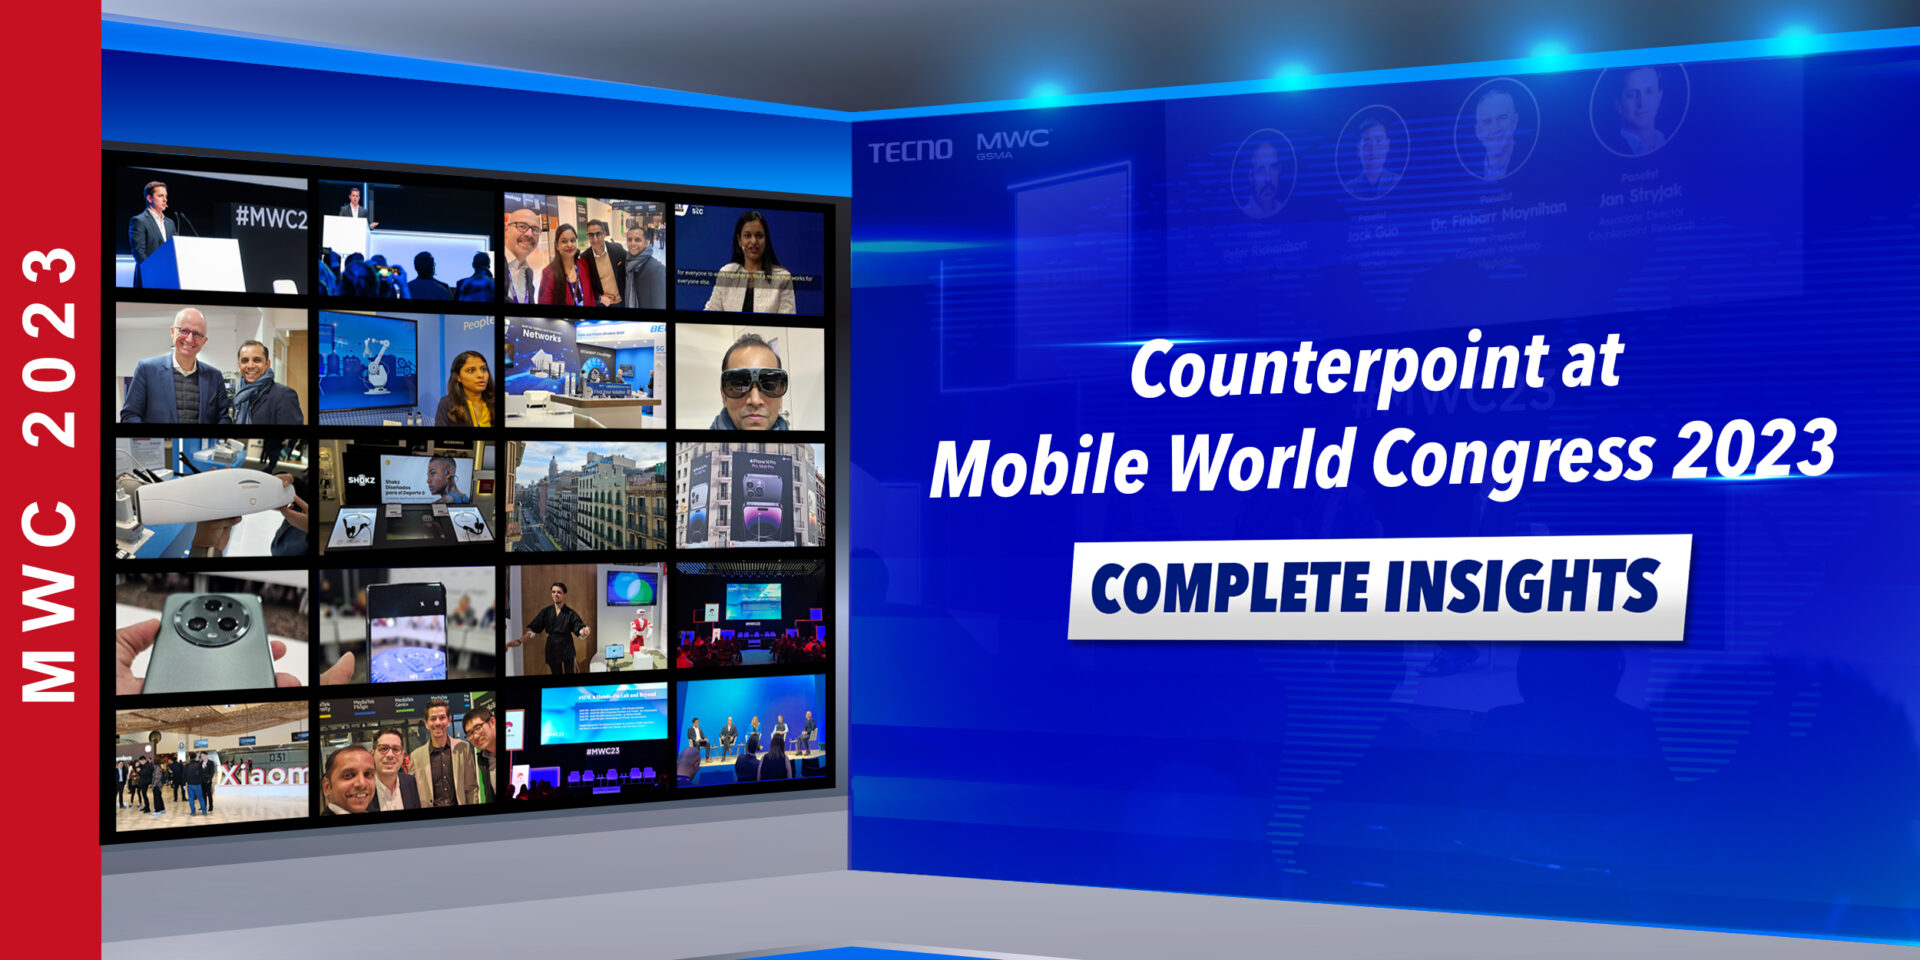 Counterpoint-at-Mobile-World-Congress-2023-Complete-Insights.jpg